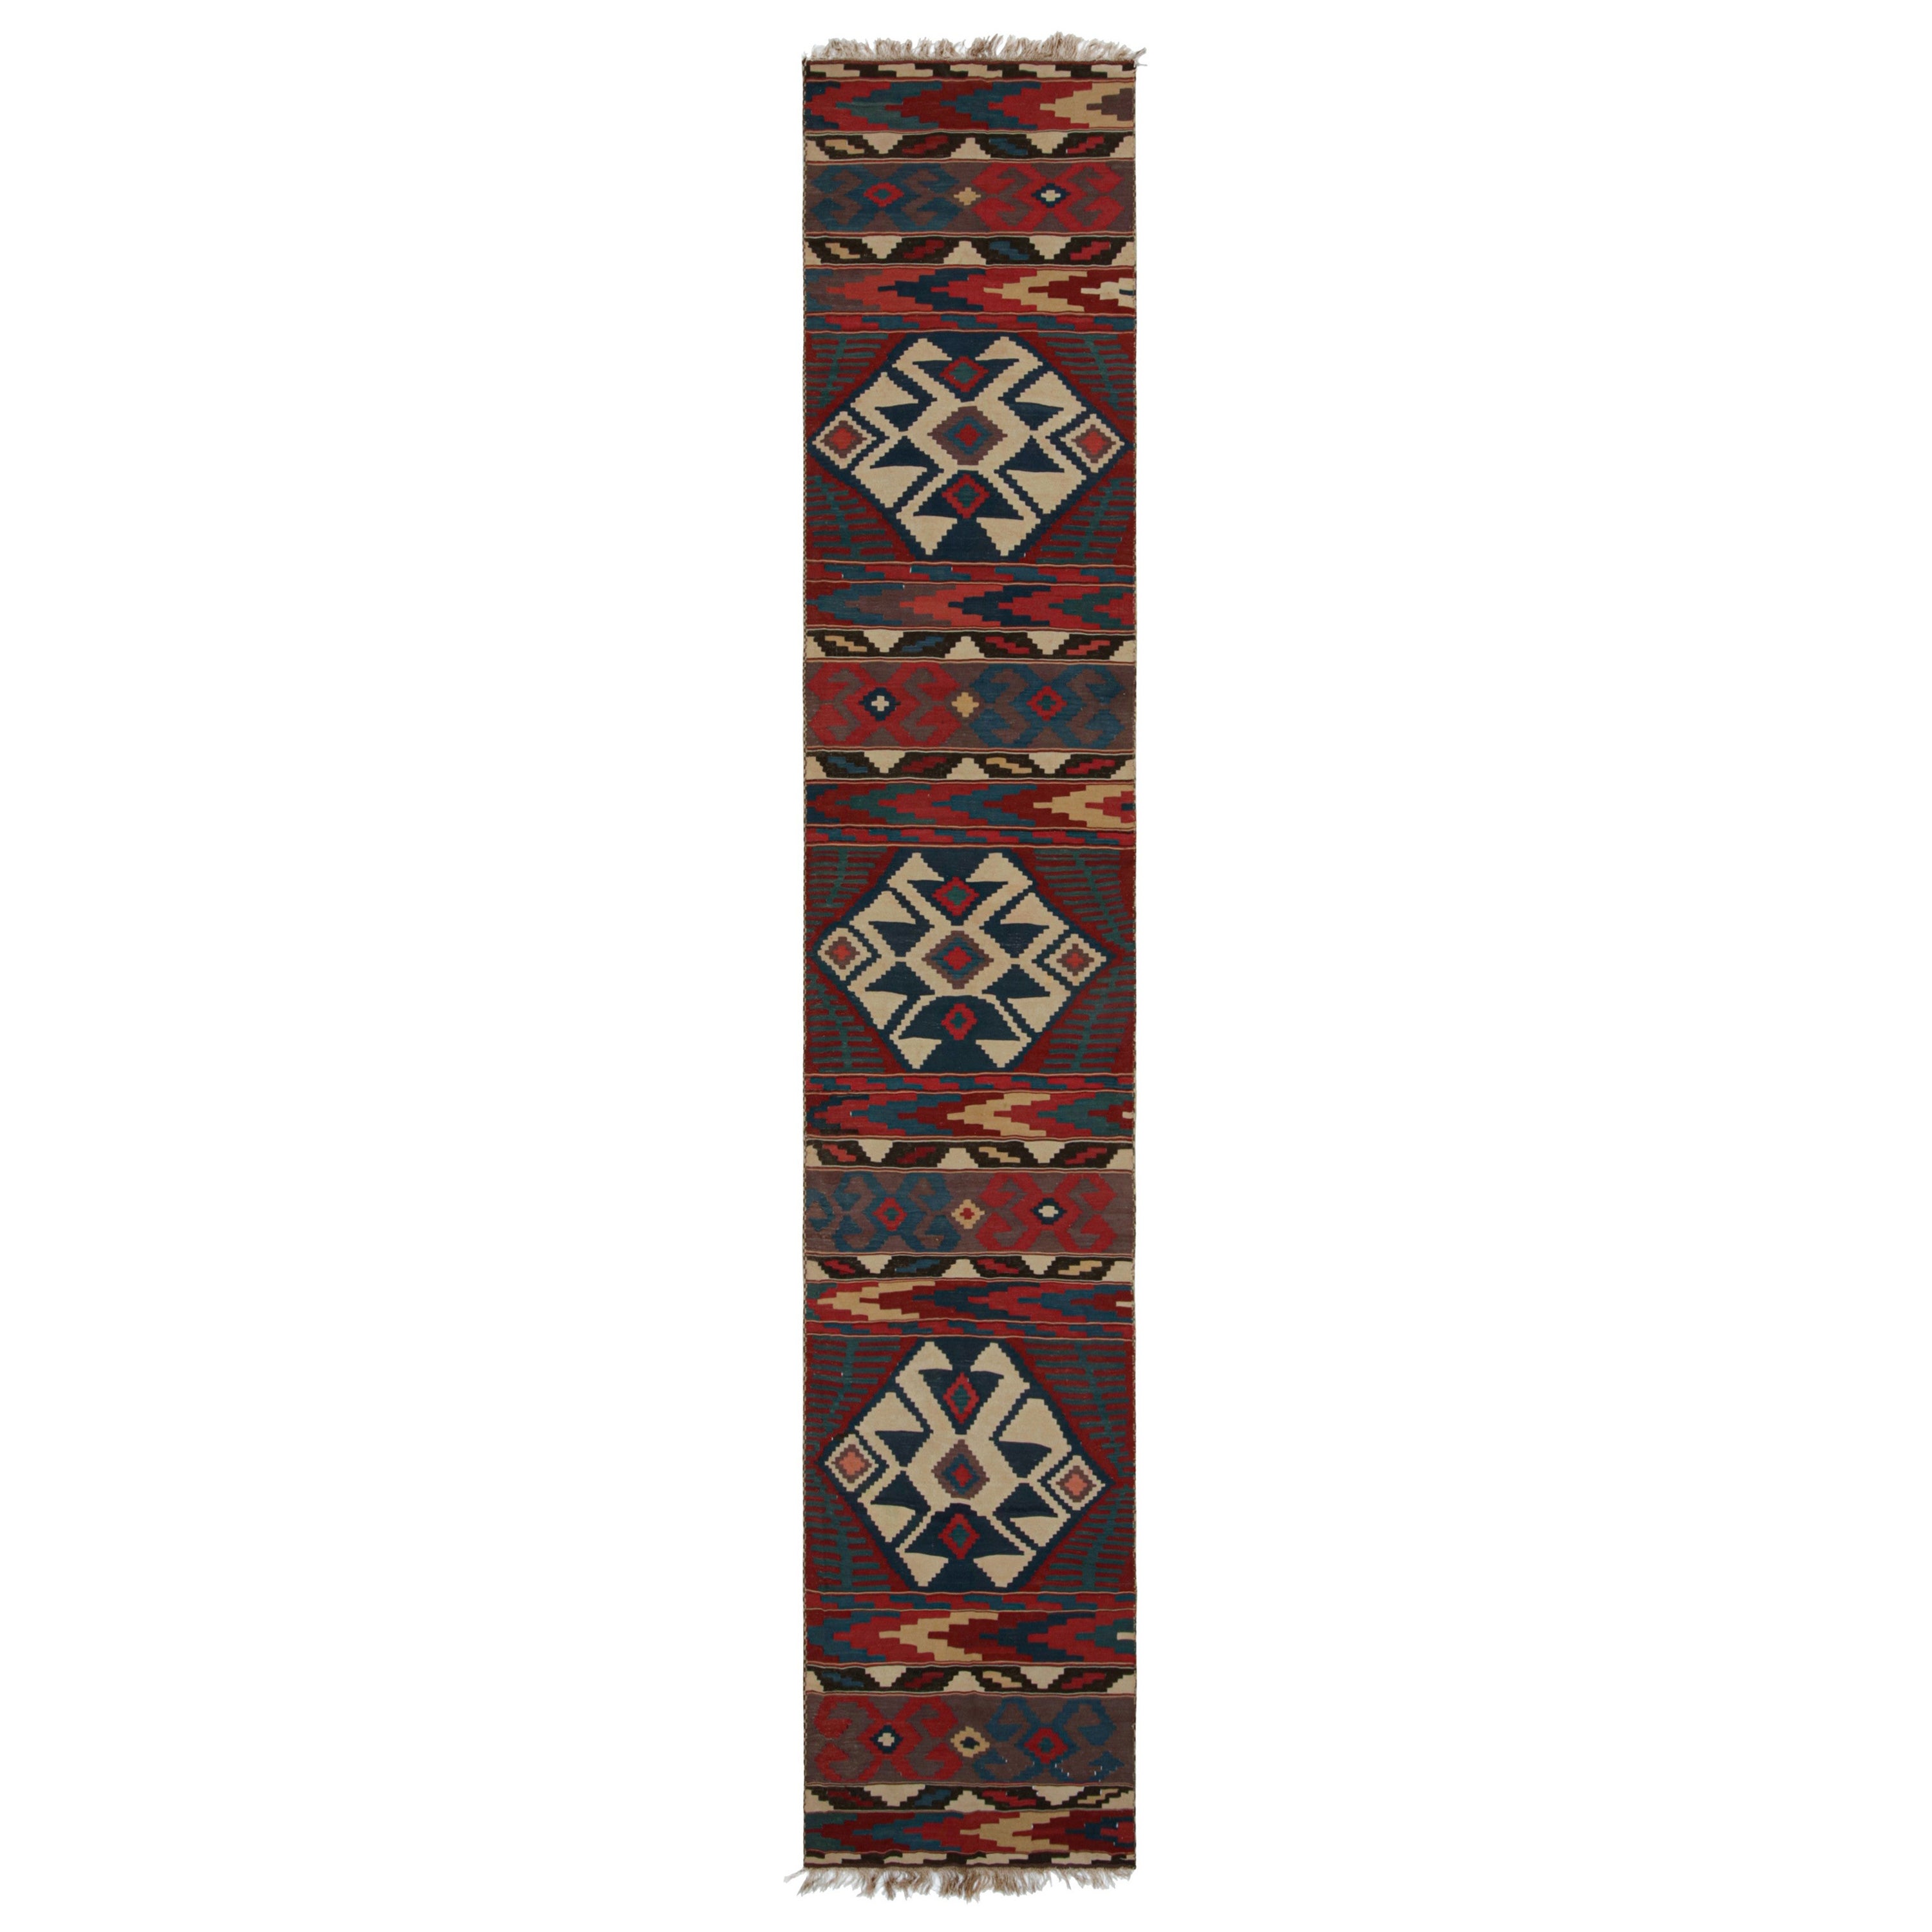 Twin Vintage Persian Kilim Runner Rugs with Geometric Patterns, from Rug & Kilim For Sale